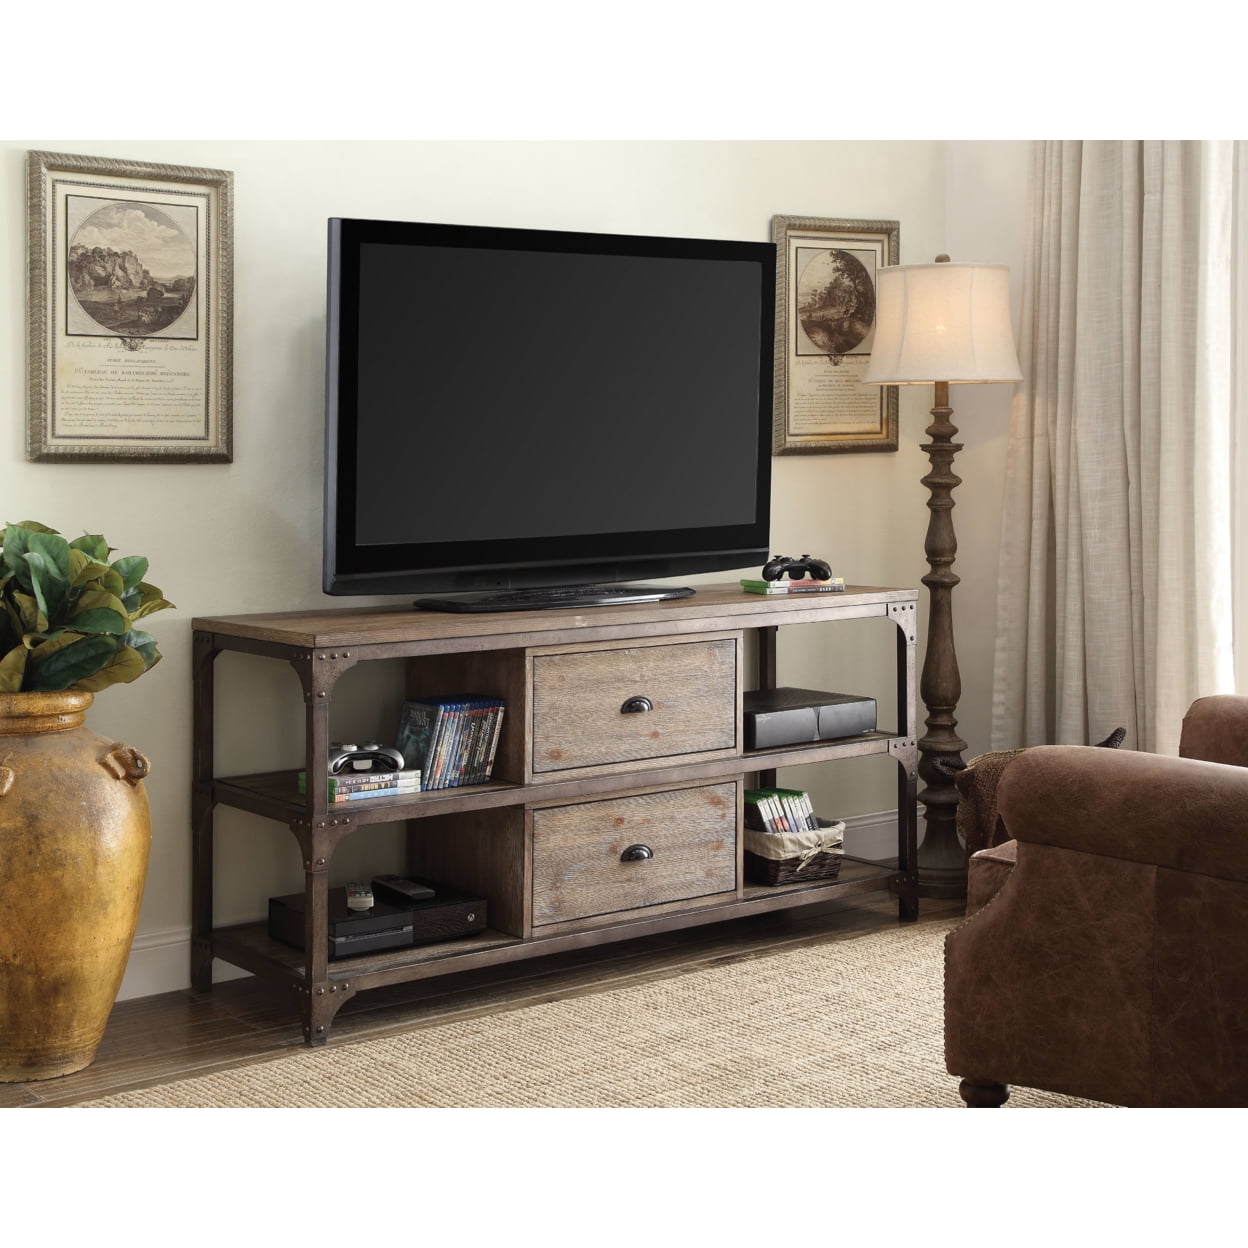 Picture of ACME 91504 2 Piece Gorden TV Stand - Weathered Oak & Antique Silver - 30 x 60 x 20 in.